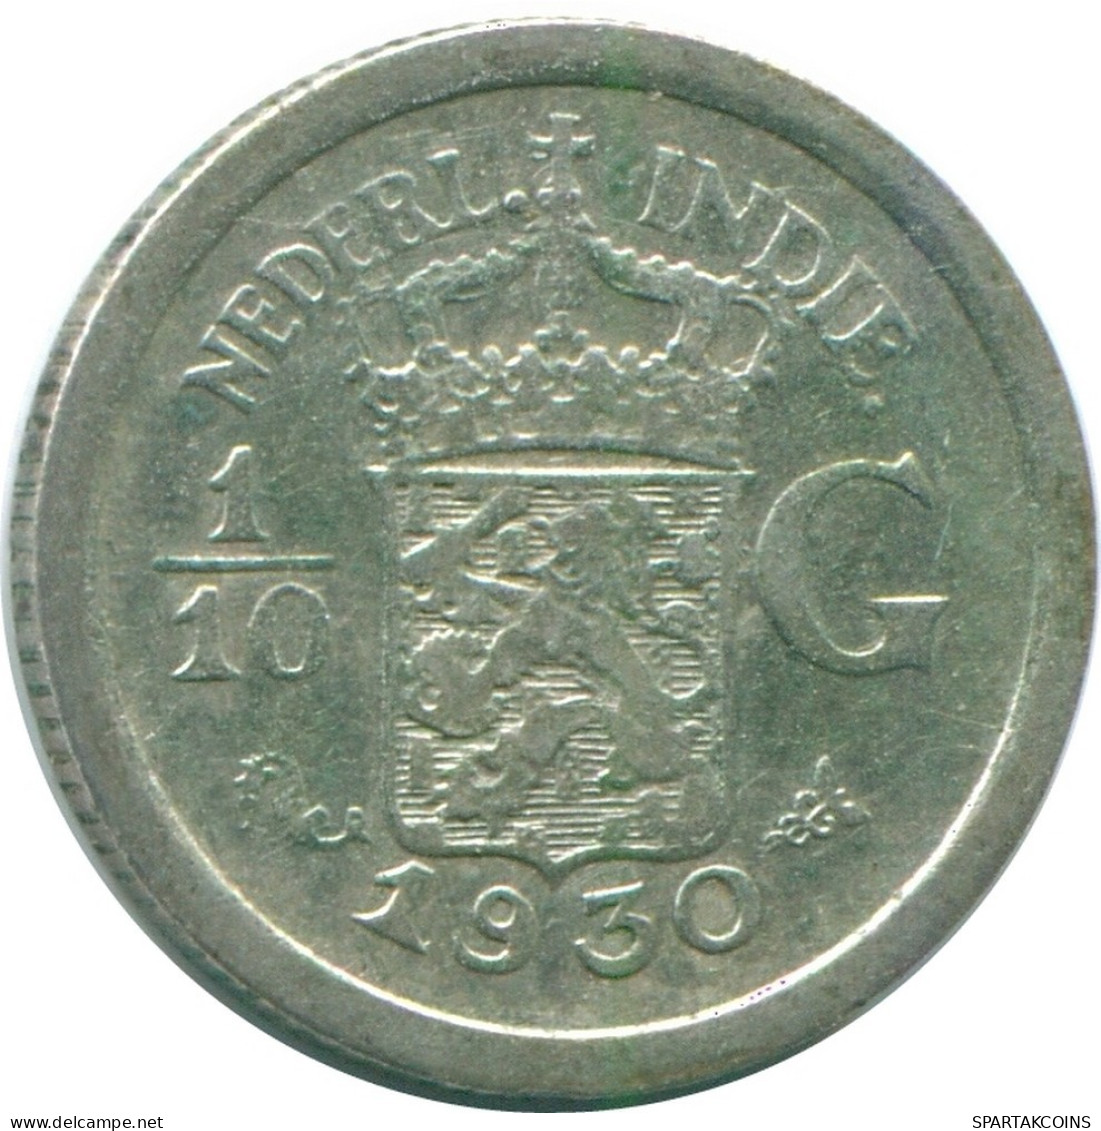 1/10 GULDEN 1930 NETHERLANDS EAST INDIES SILVER Colonial Coin #NL13458.3.U.A - Dutch East Indies